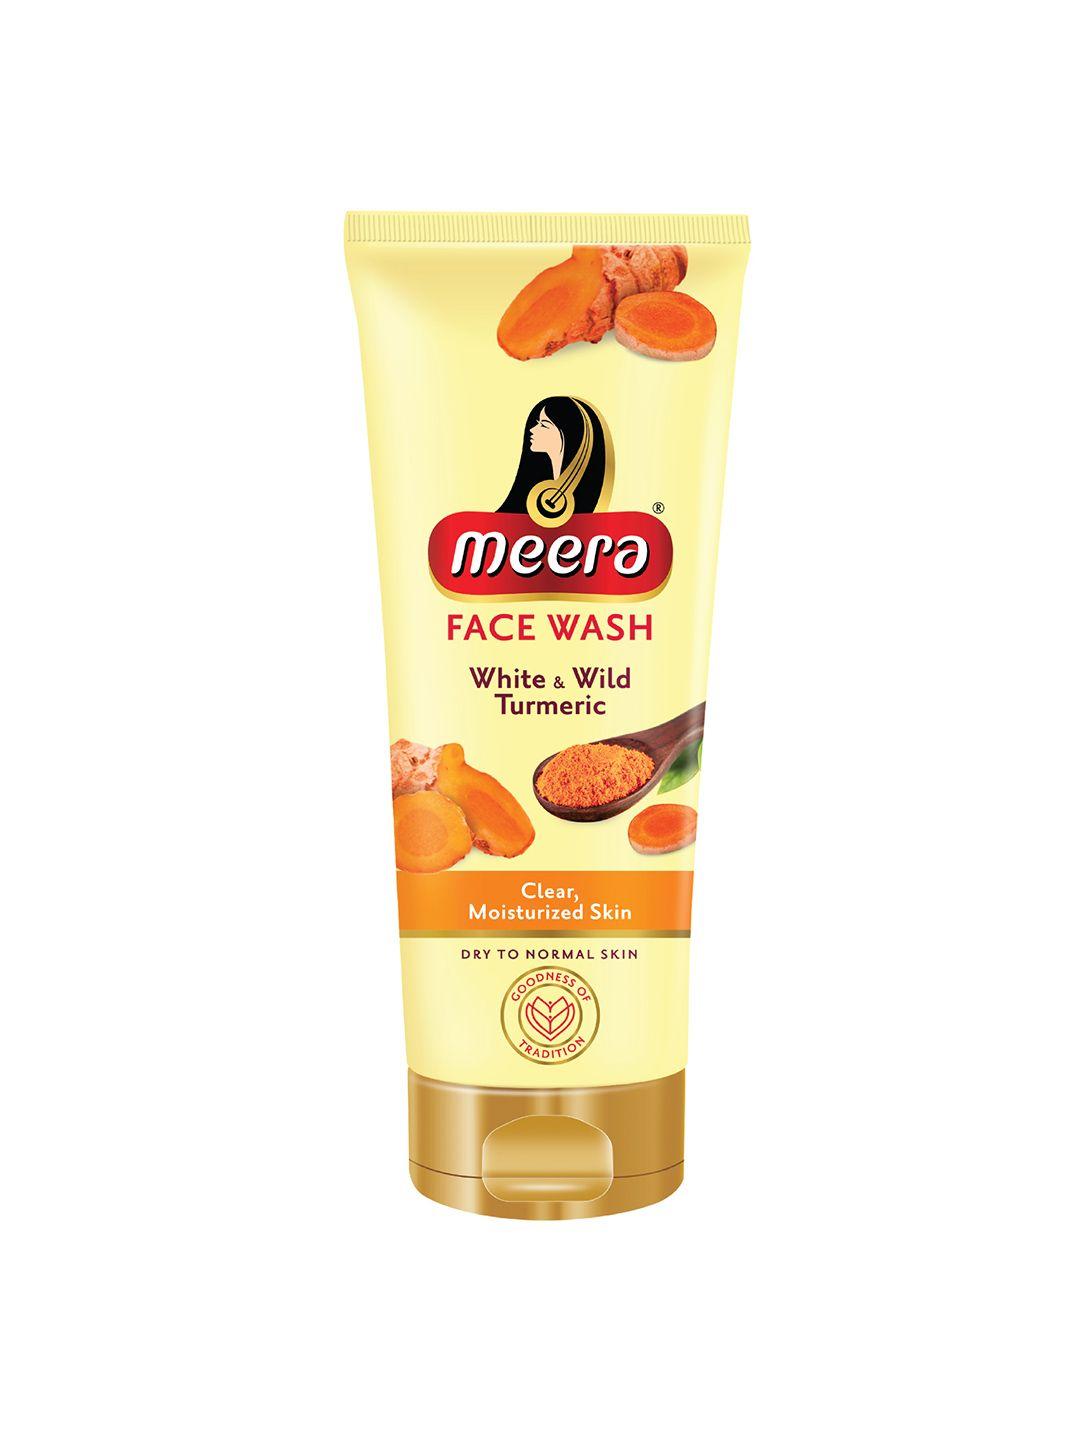 meera goodness of tradition white & wild turmeric face wash for acne - 100g